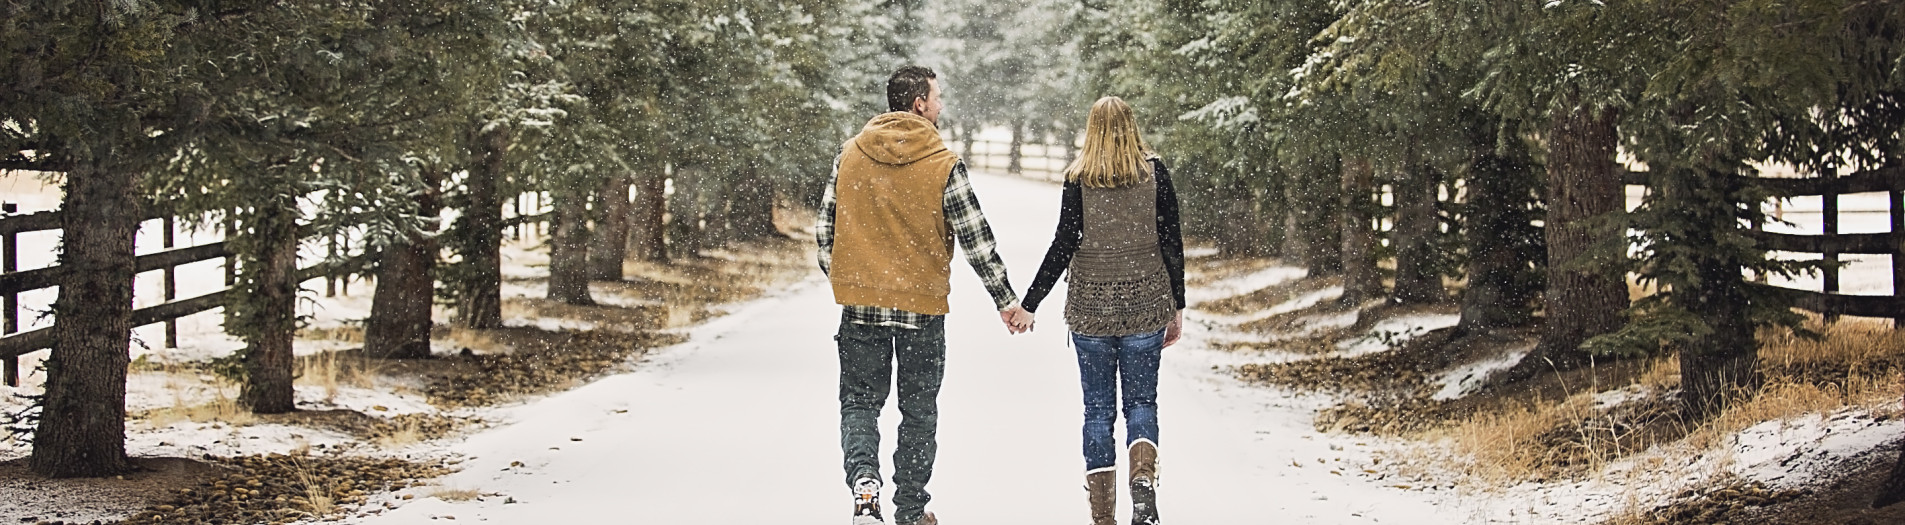 Cristy and Ben - Bailey, CO - Winter Engagement